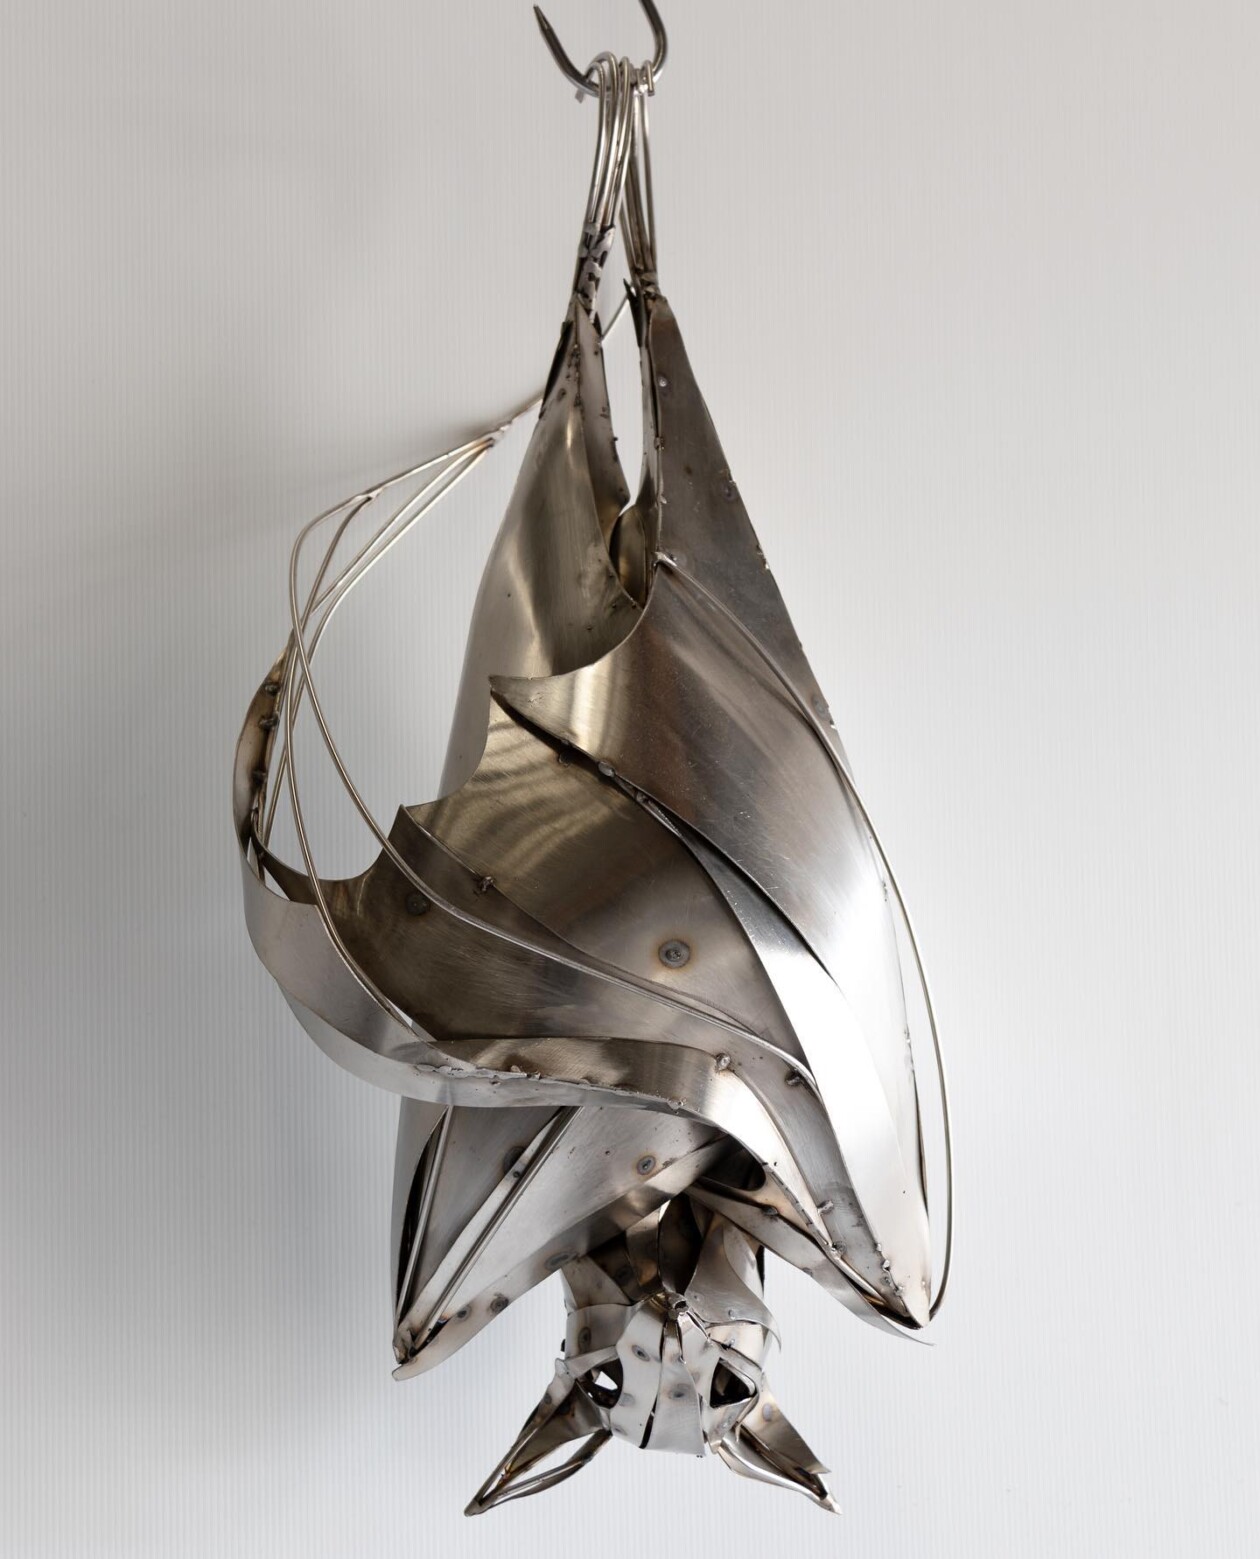 Magnificent Metallic Animal Sculptures Made With Sweeping Lines By Georgie Seccull (7)